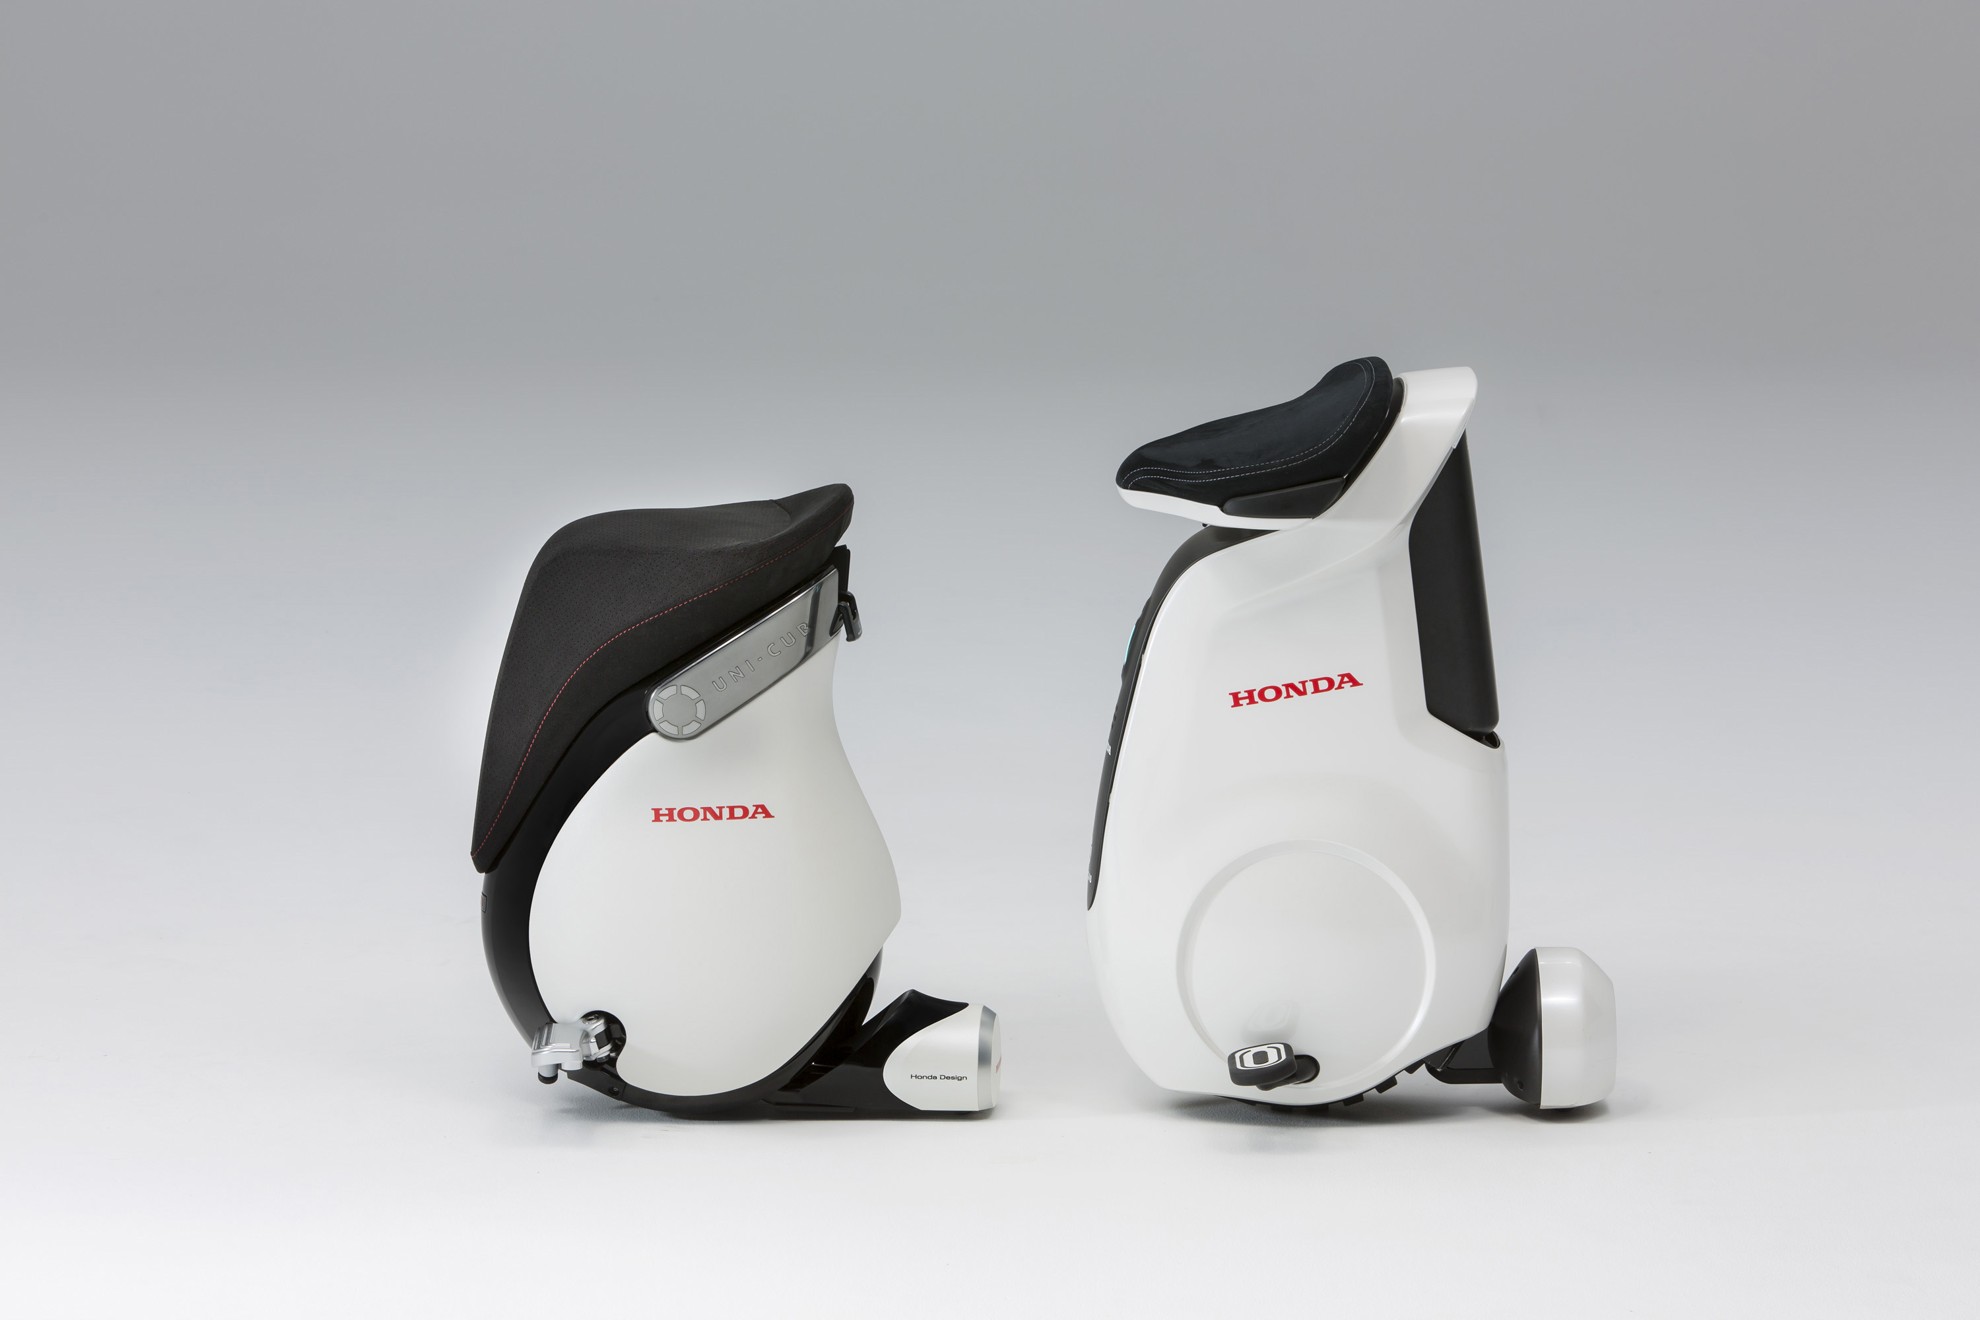 2013 Tokyo Motor Show – Honda Announces New Personal Mobility Devic